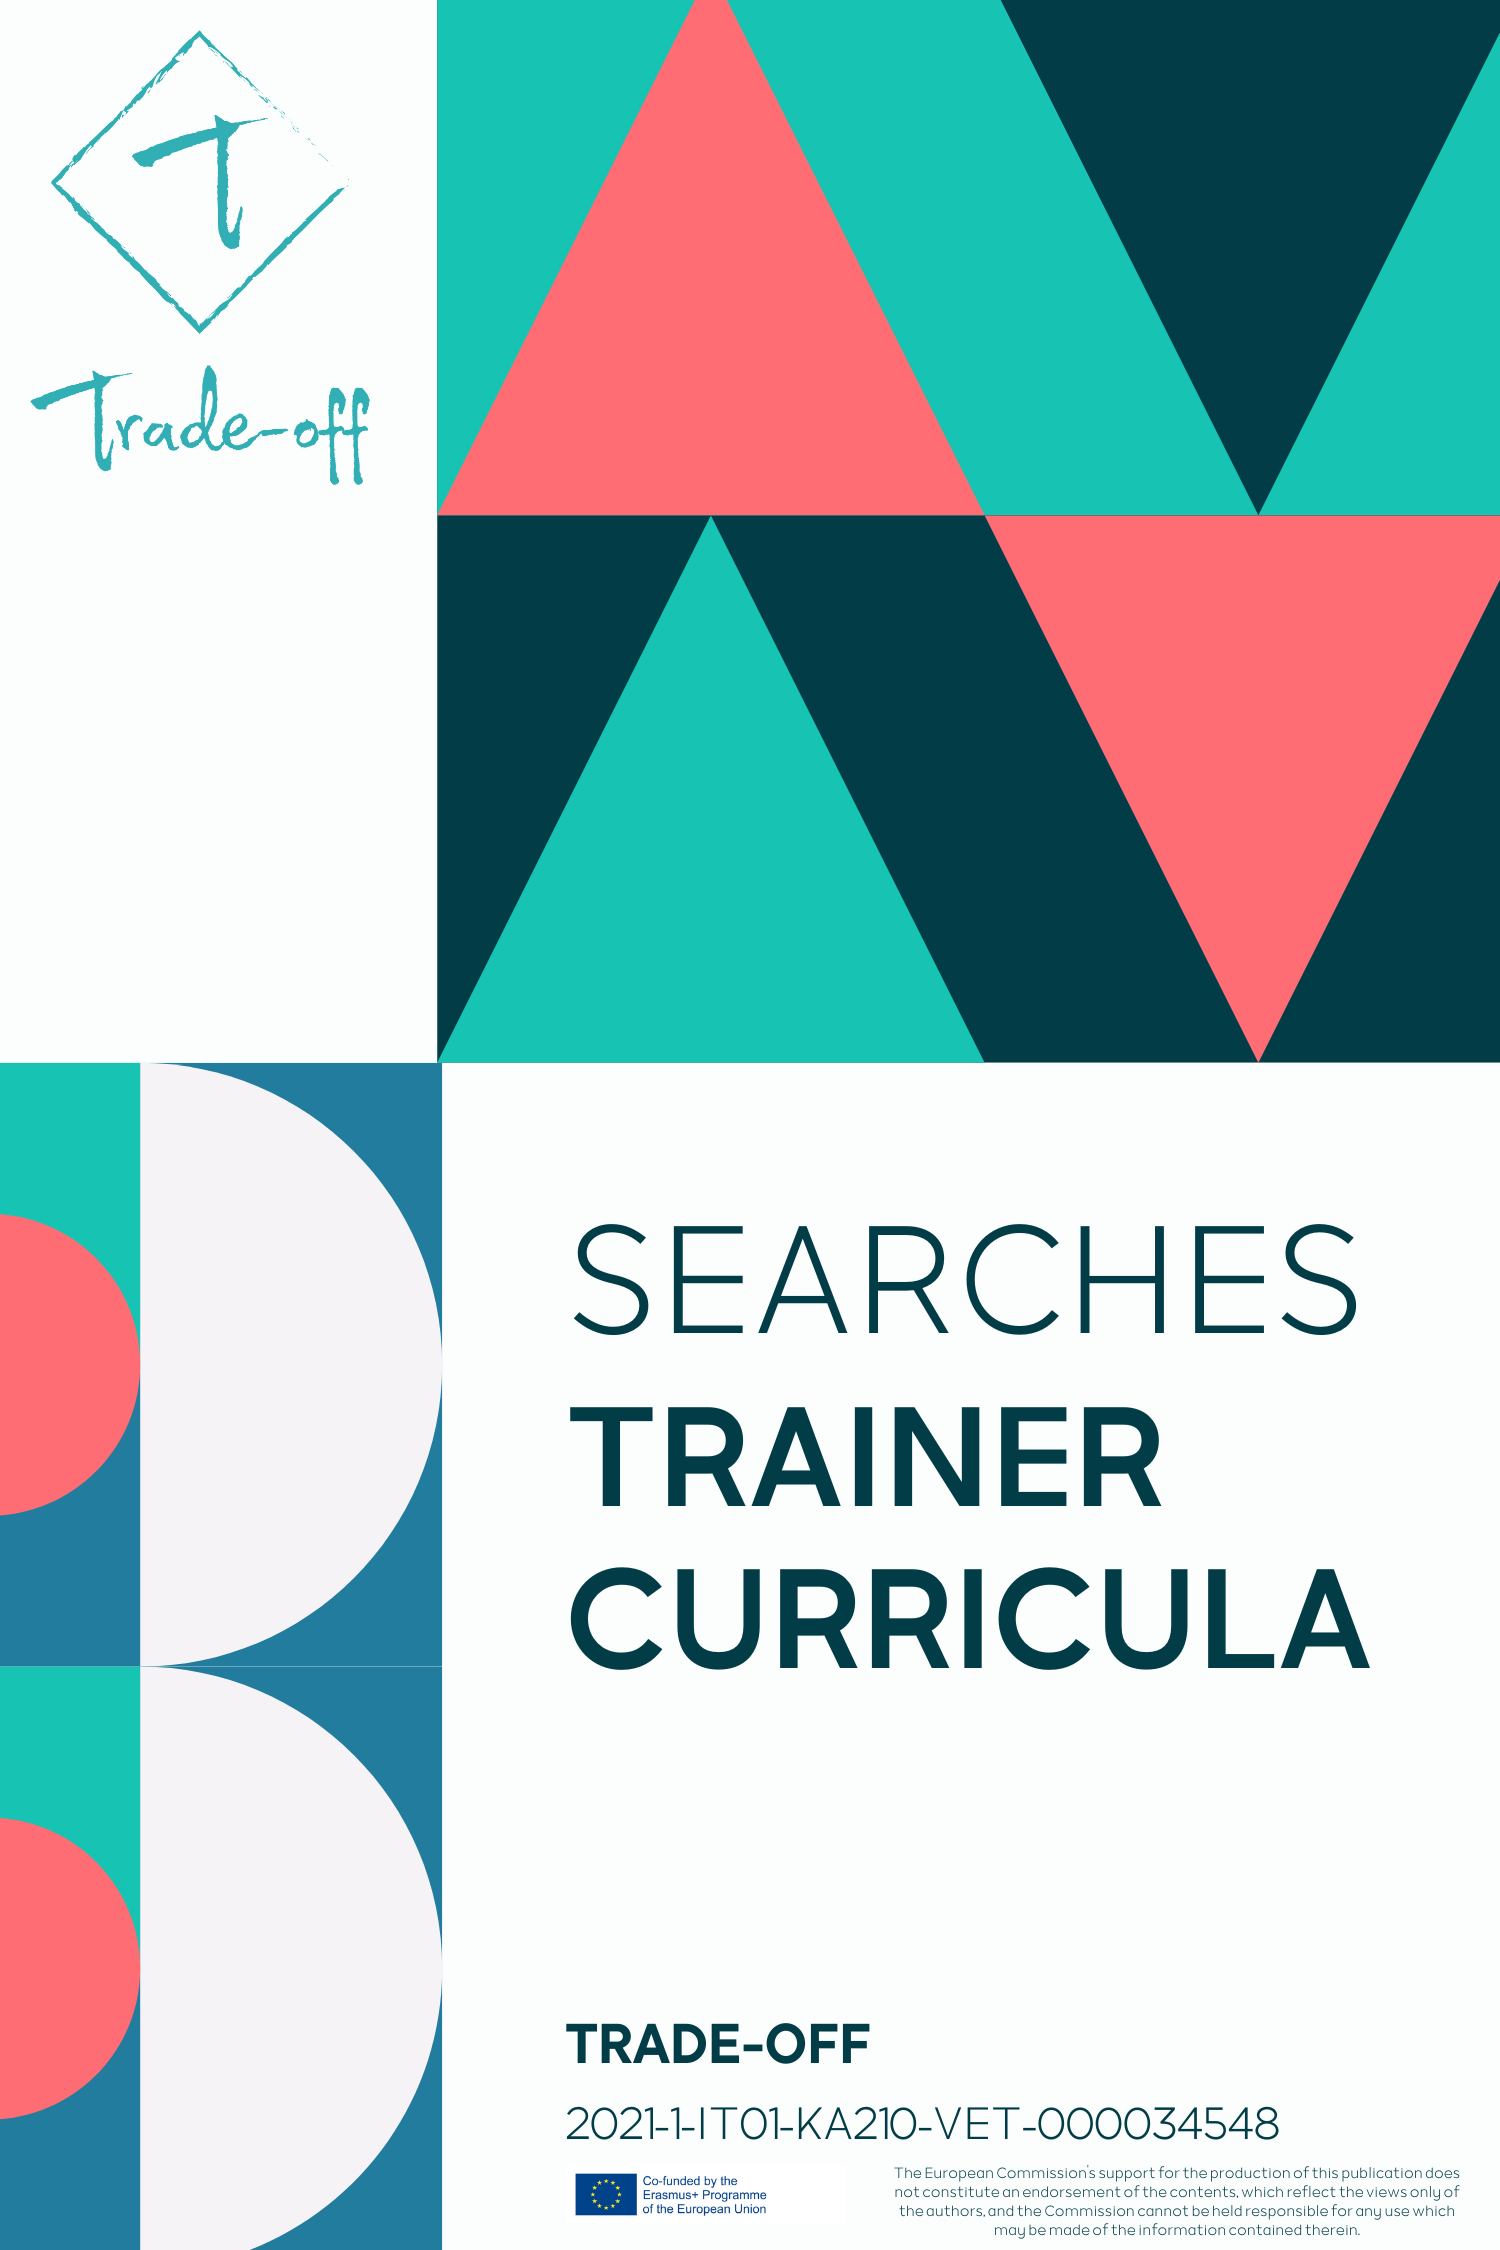 TRADE-OFF_TRADE-OFF_SEARCHES_TRAINER CURRICULA: Discovering the new curricula of corporate trainers for non-formal training in the company